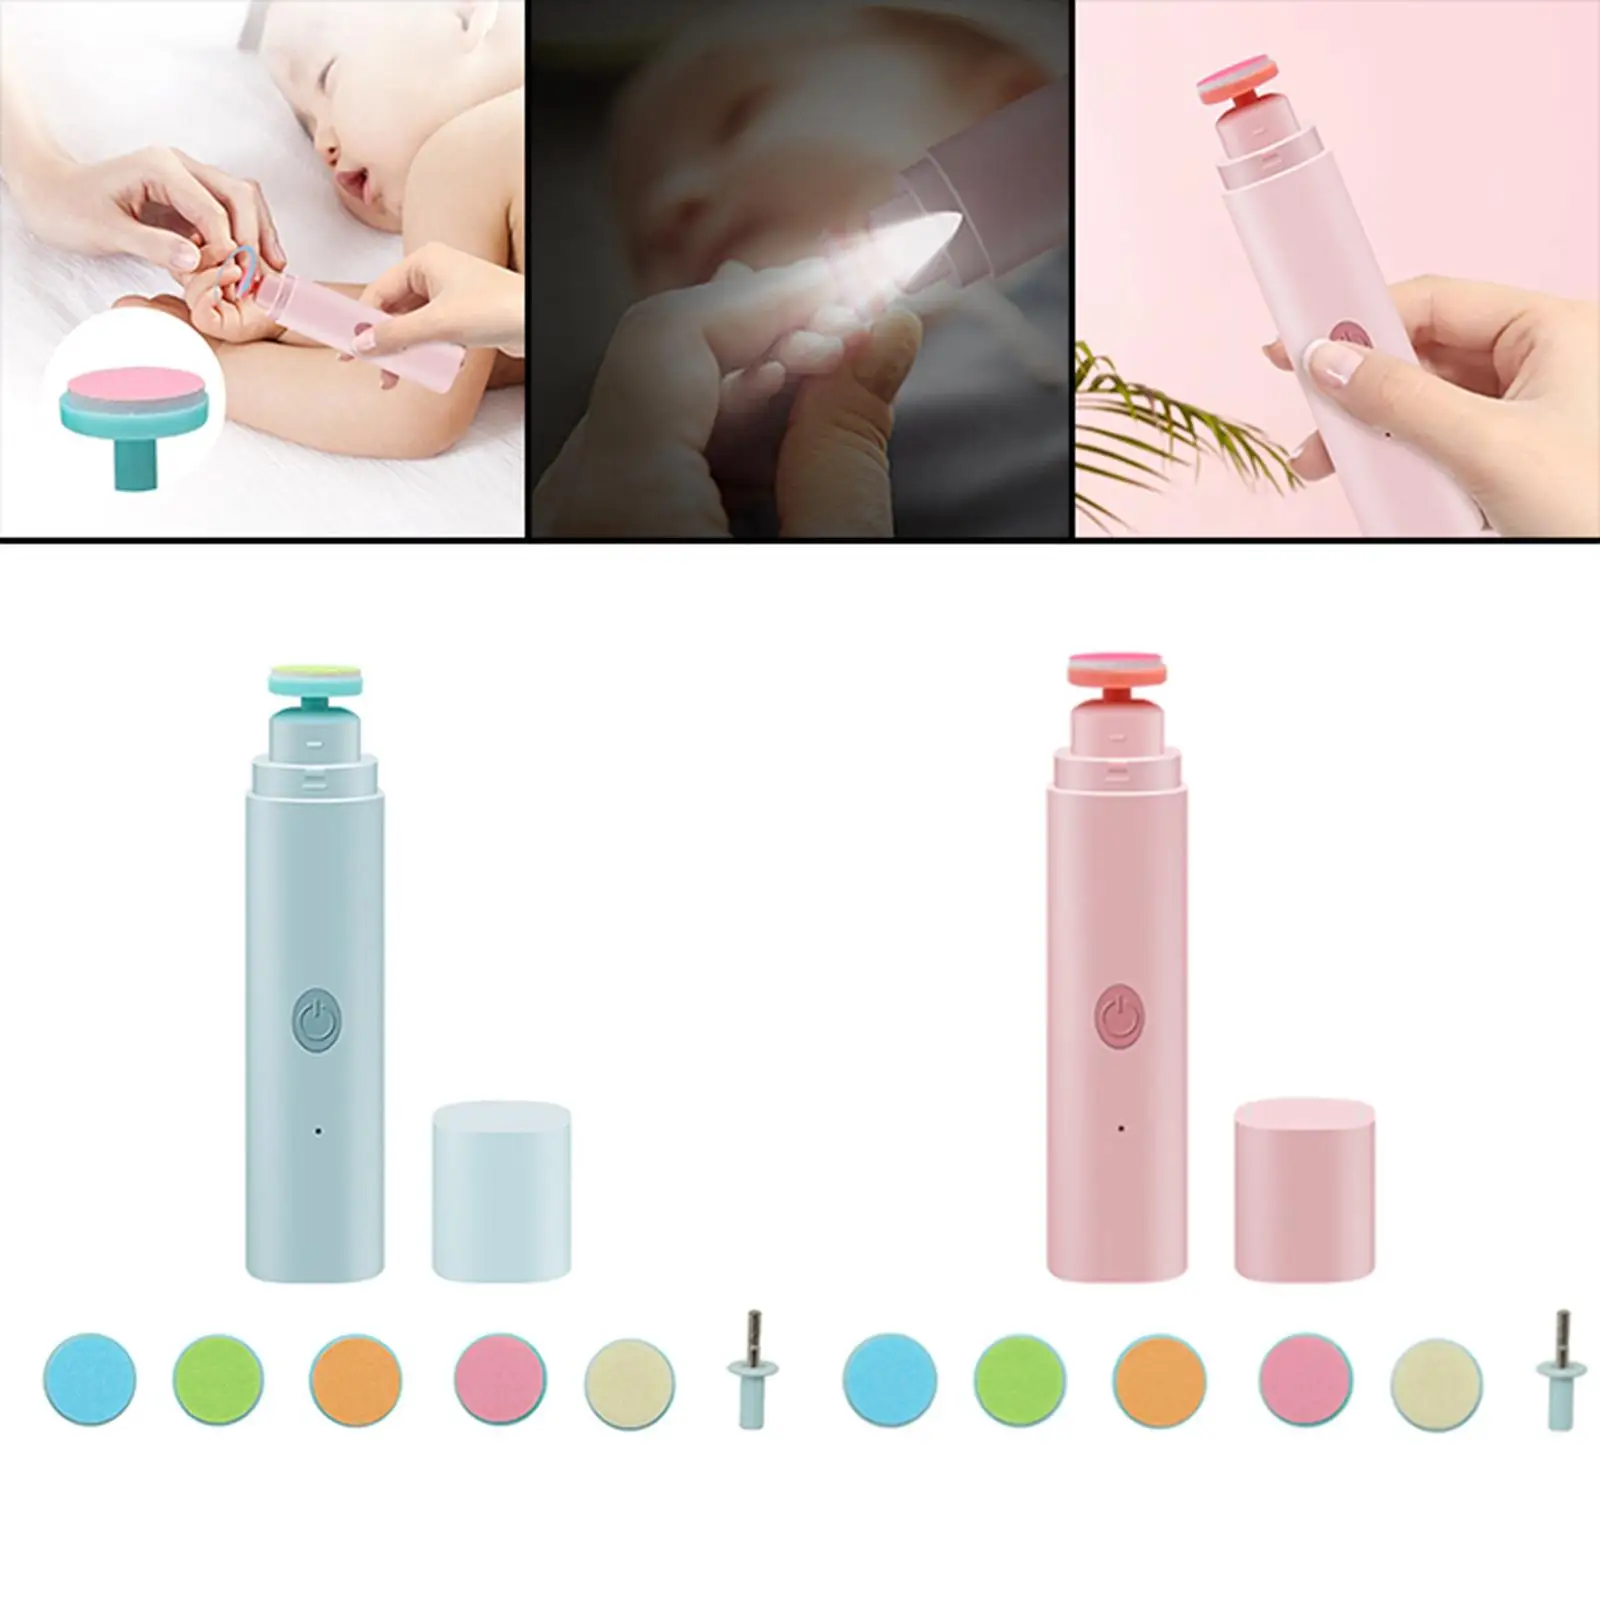 Nail File Drill for Baby Safe Manicure Care Grooming for Infant Kids Adults